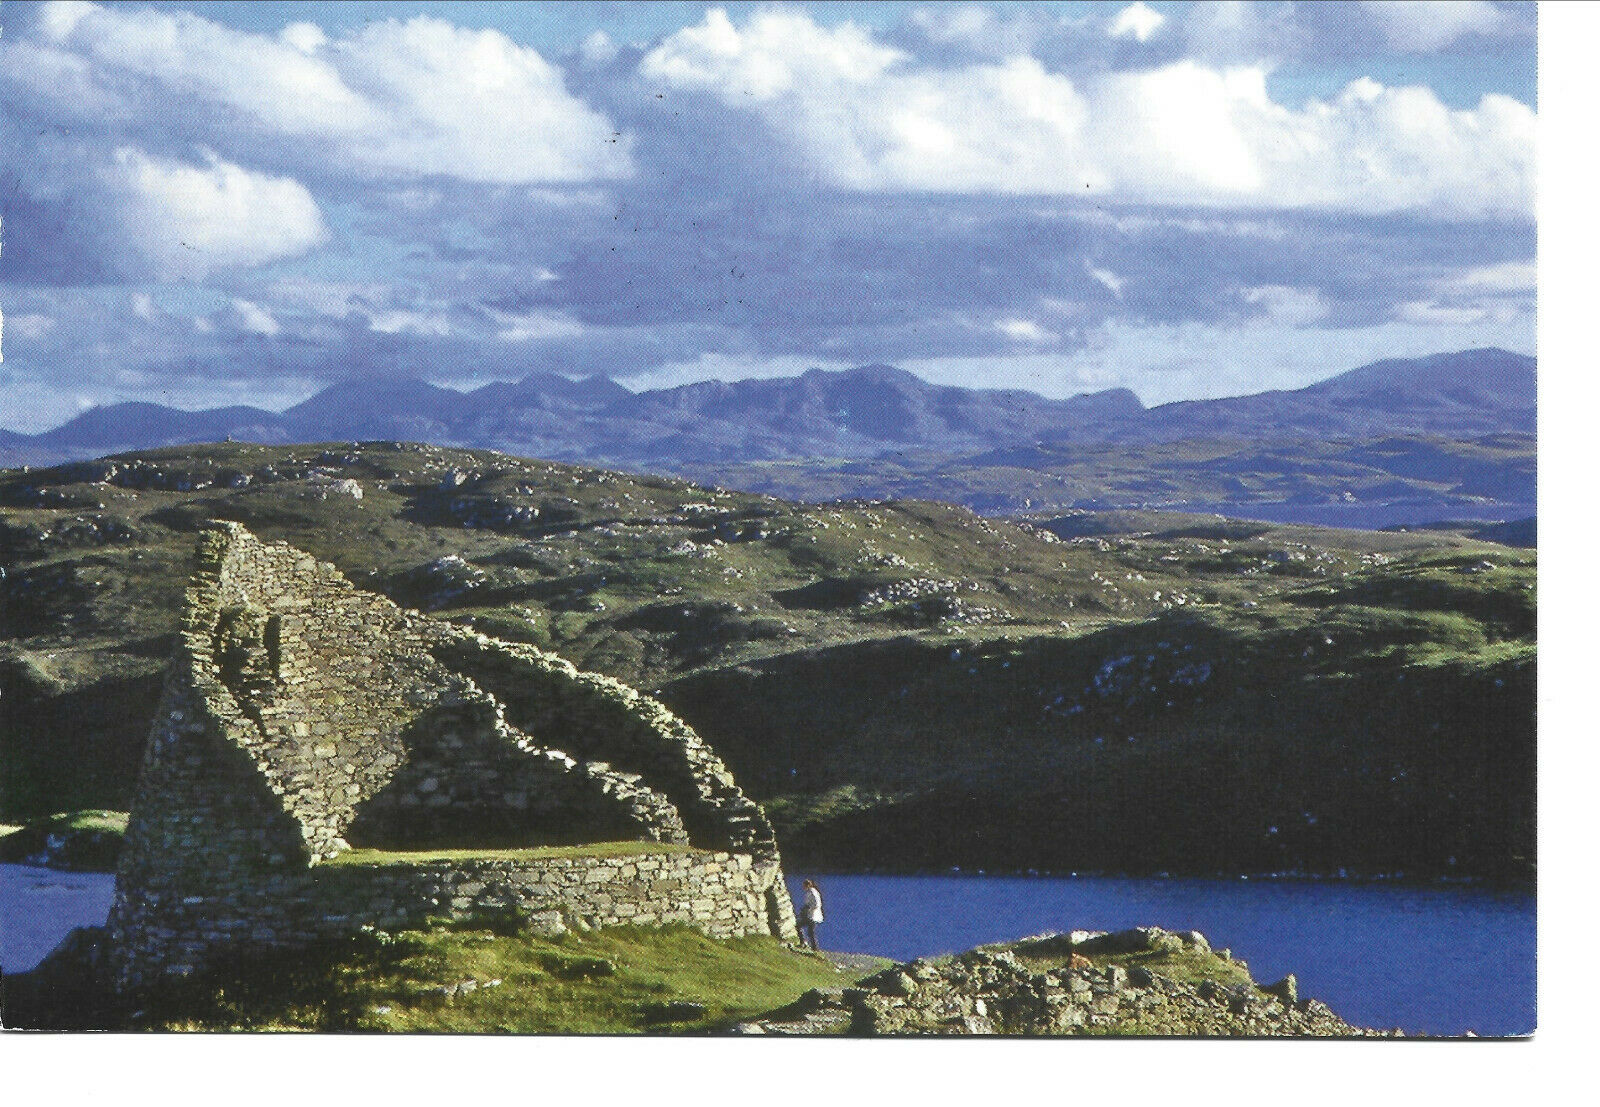 House Clearance - VIEW OF DUN CARLOWAY BROCH, ISLE OF LEWIS, SCOTLAND.